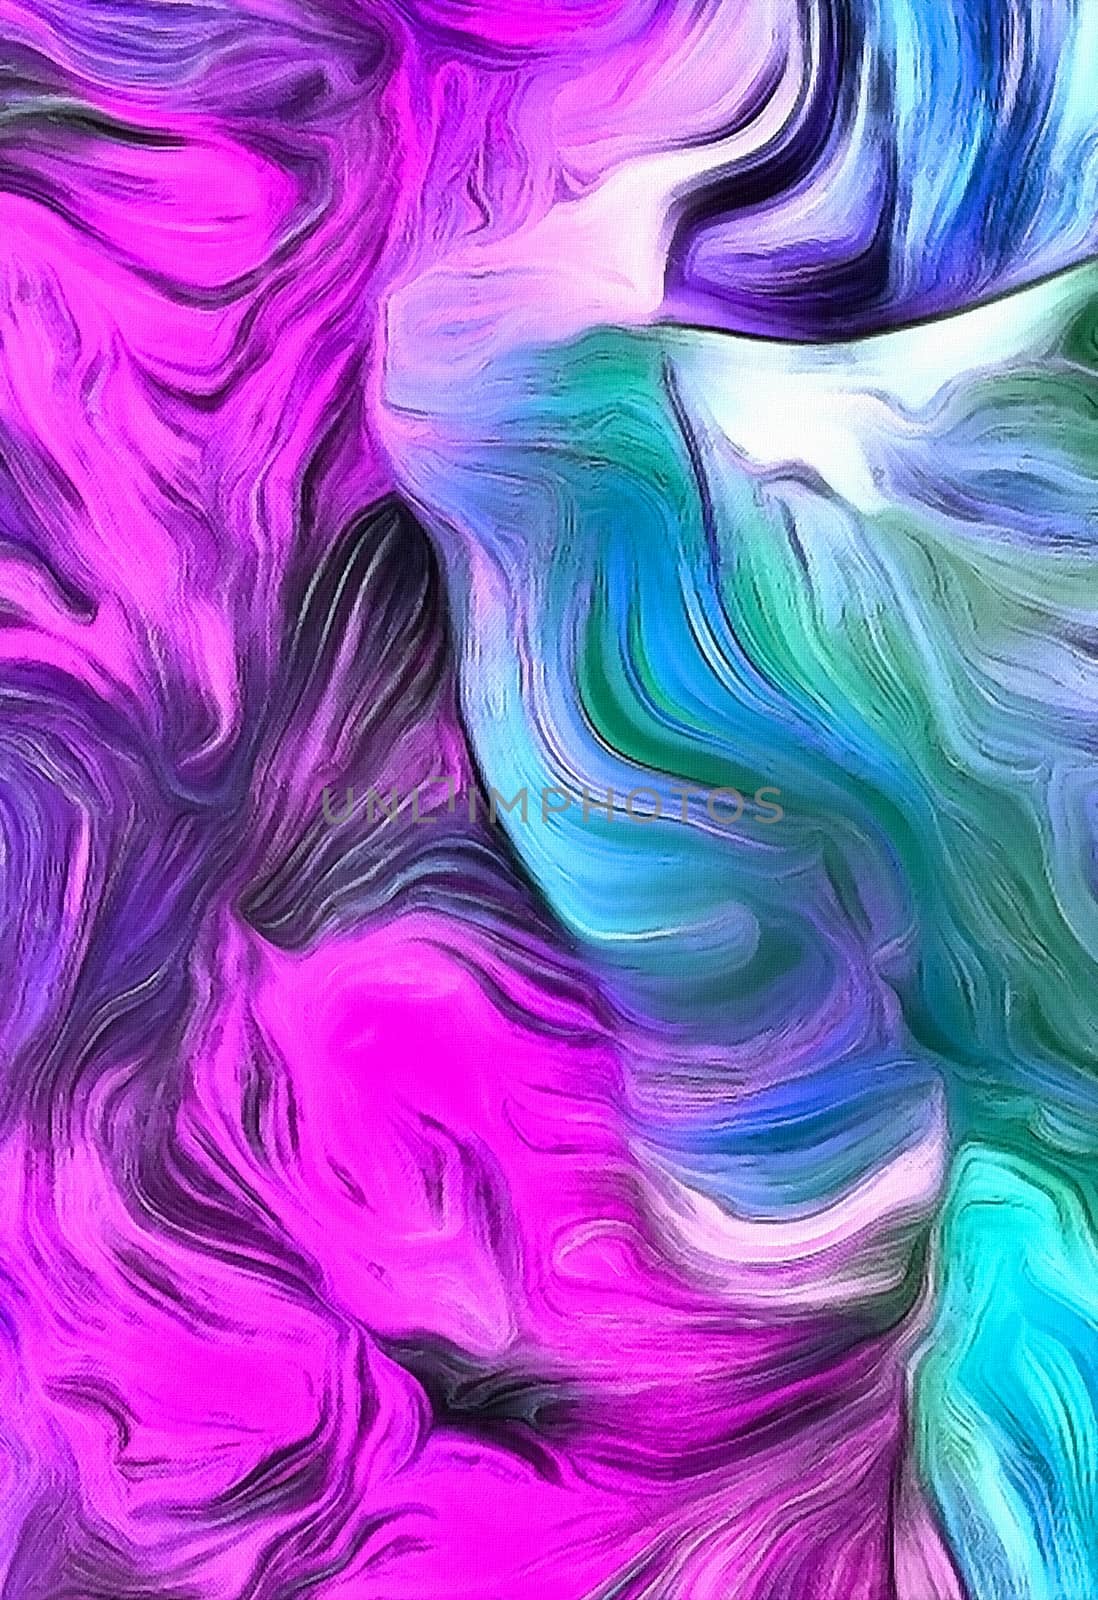 Swirling Vivid Colors Abstract. 3D rendering